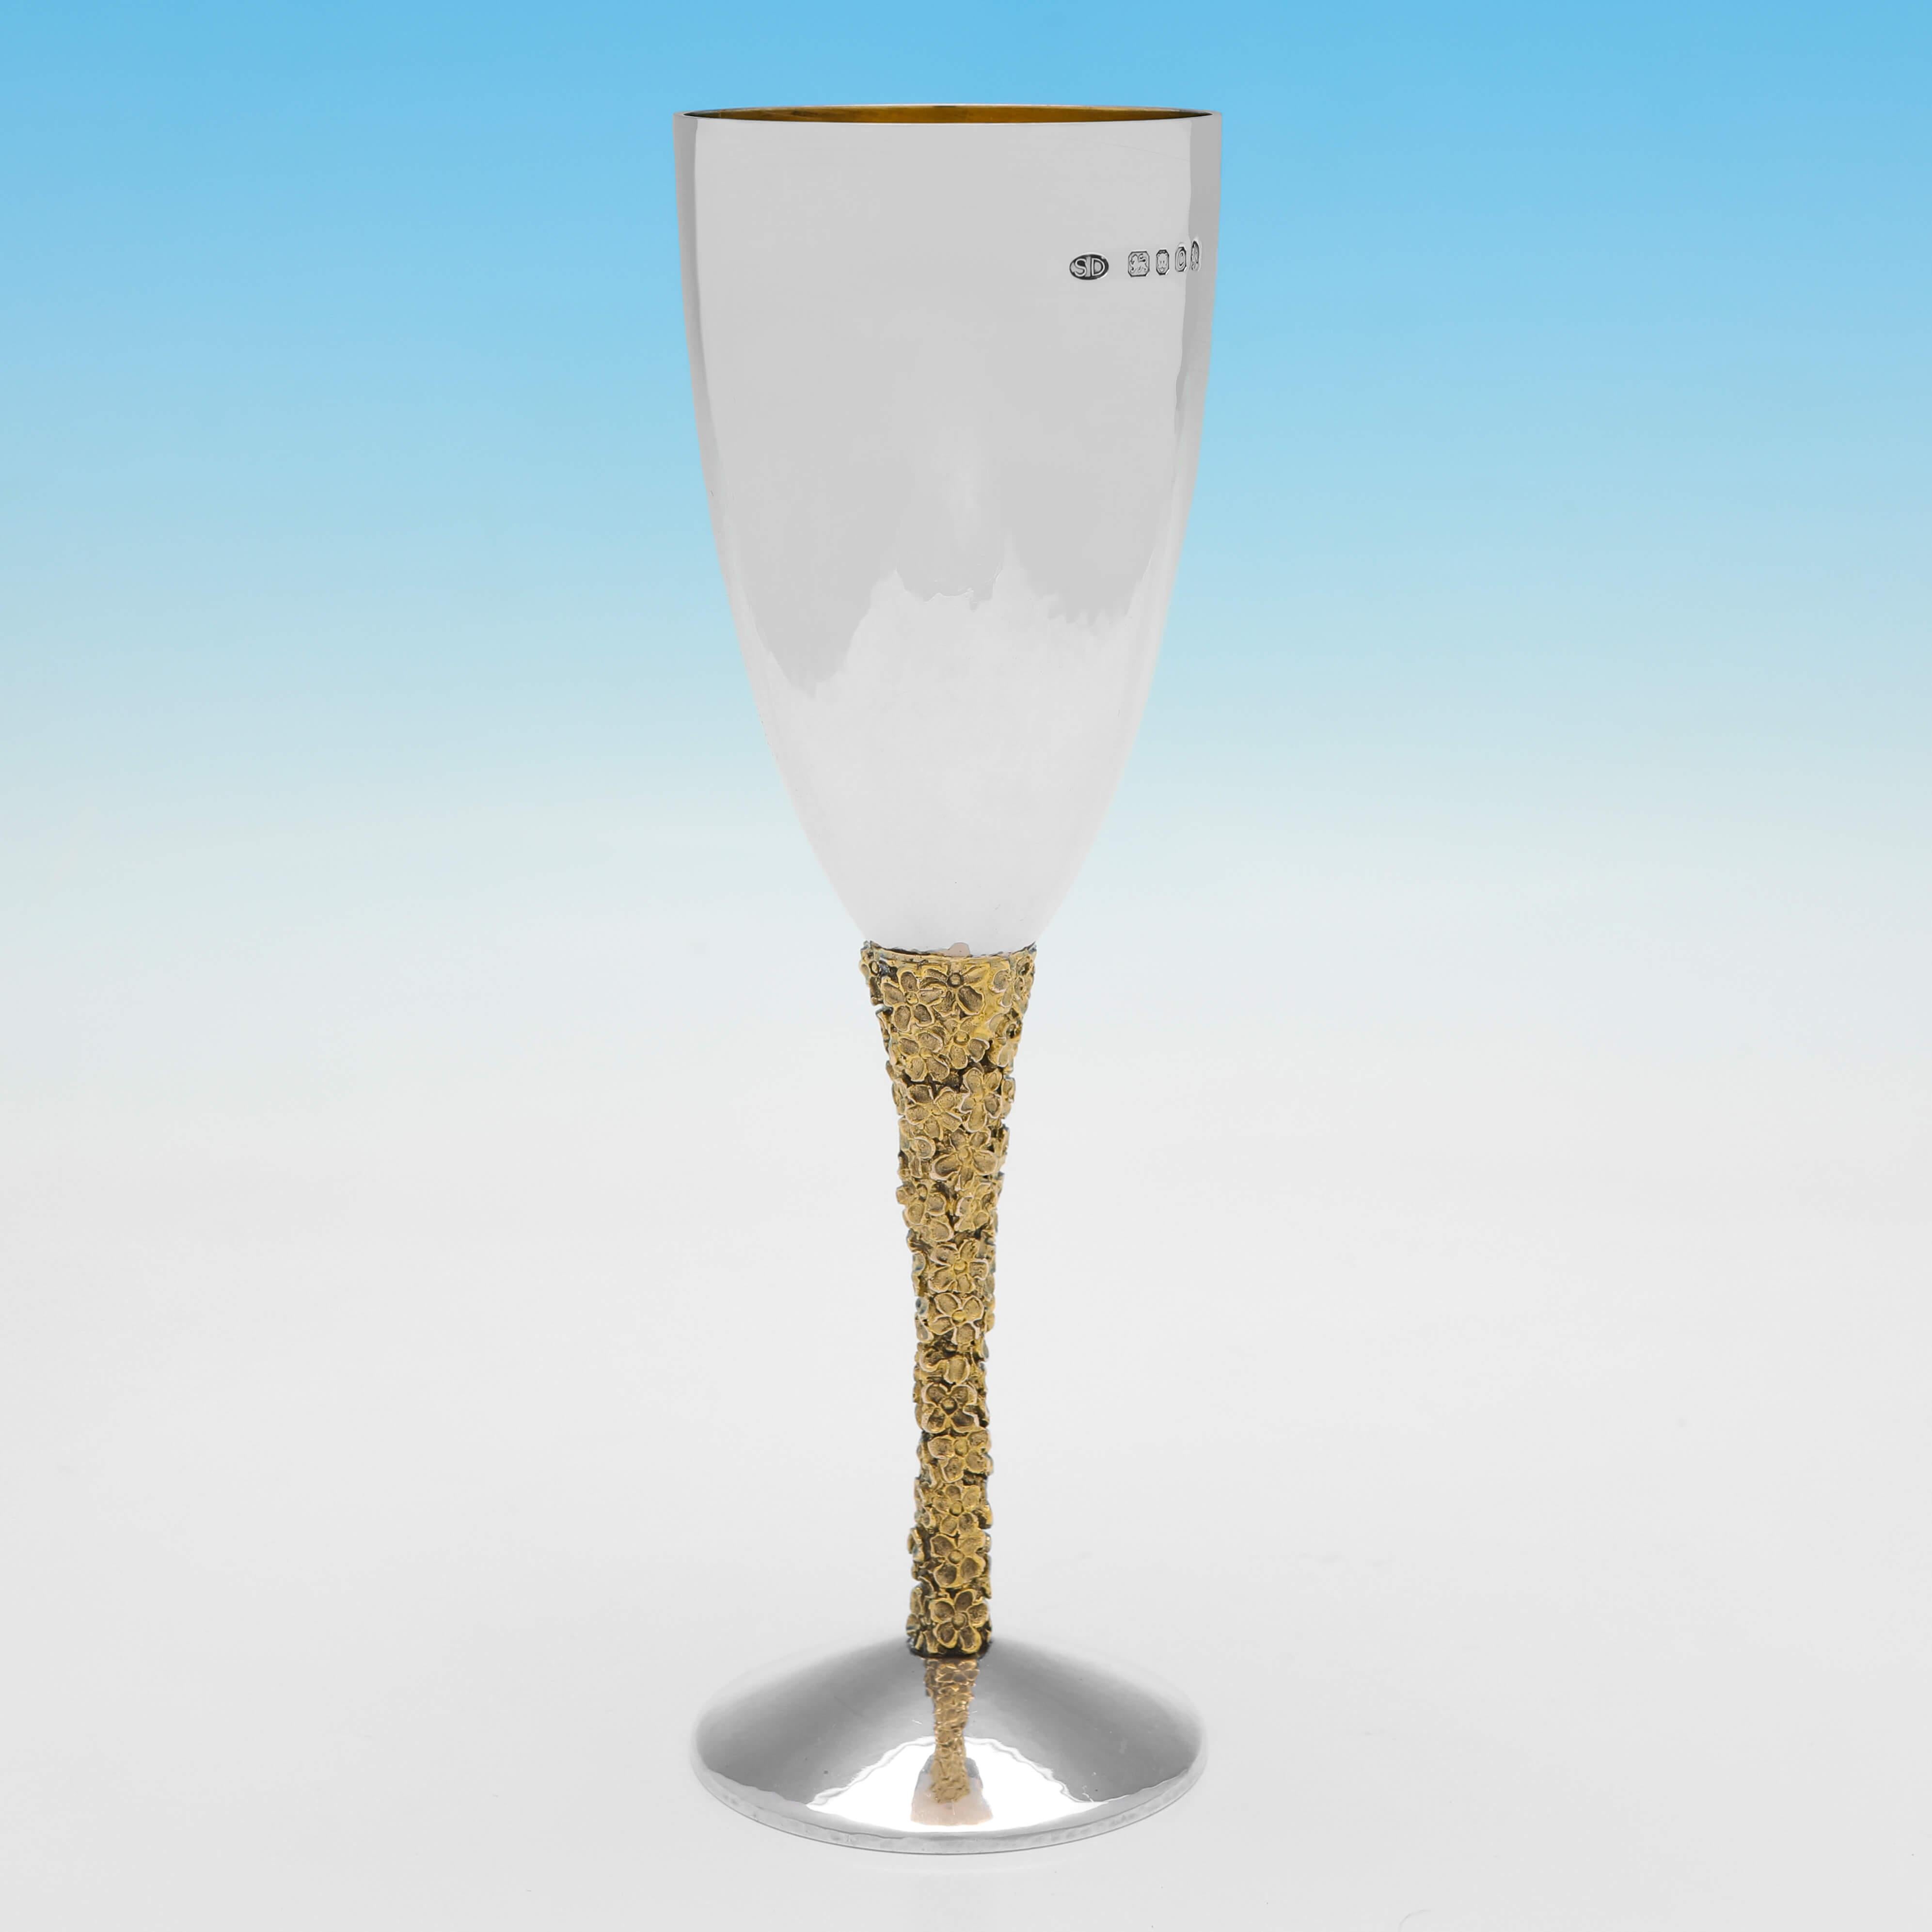 Hallmarked in London in 1977 by Stuart Devlin, this handsome pair of Sterling Silver Champagne Flutes, have cast and gilt floral head decoration to the stems, a hand hammered finish, and gilt interiors. 

Each champagne flute measures 7.5